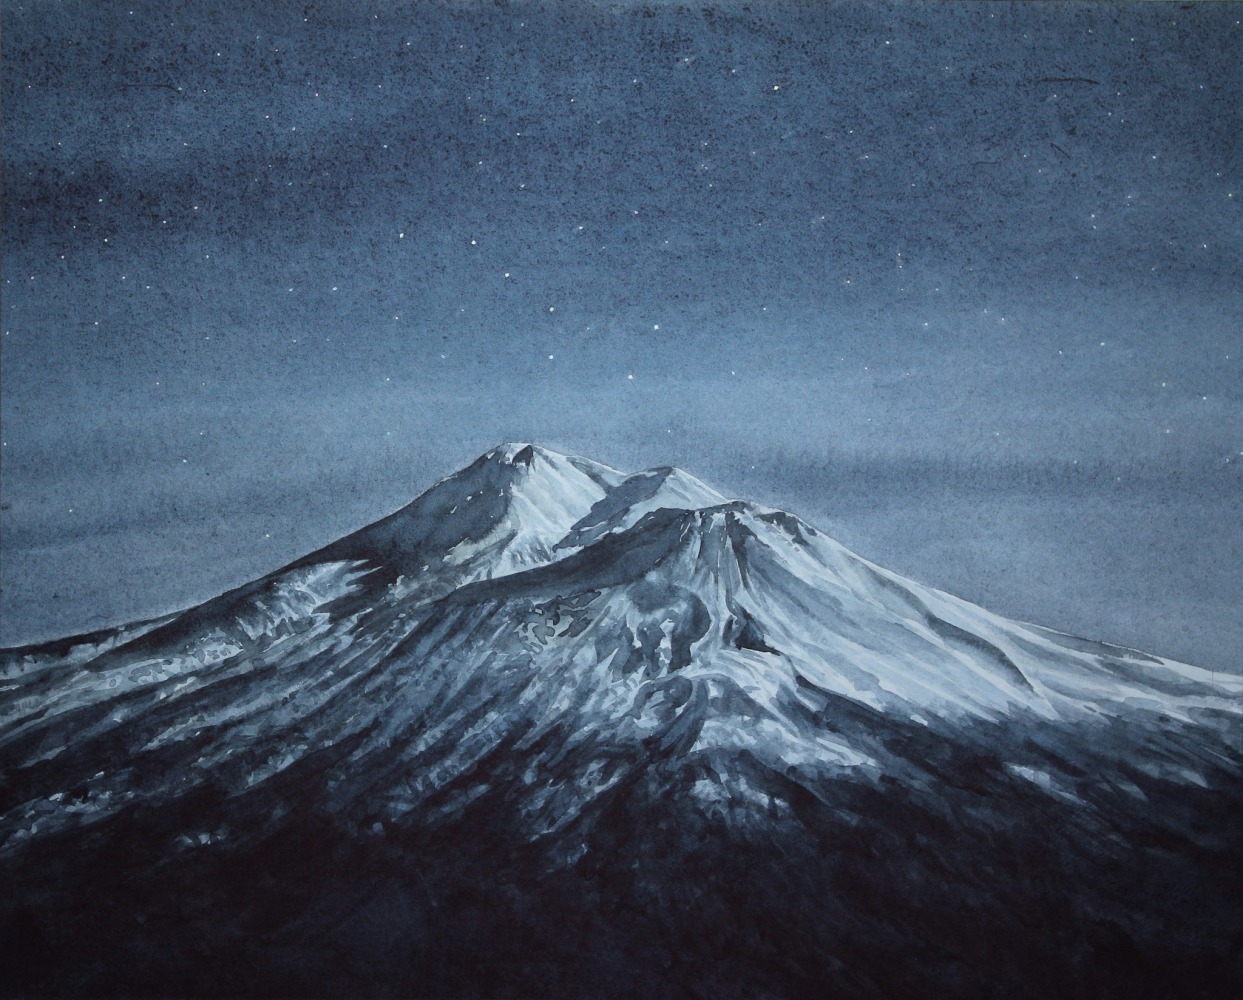 Tim Gardner

Mt Shasta in Moonlight

2013

Watercolor on paper

19 1/2 x 24 inches (49.5 x 61 cm)

29 1/8 x 33 3/8 inches (84.8 x 74 cm) framed

Signed and dated verso

TG 454

&amp;nbsp;

INQUIRE